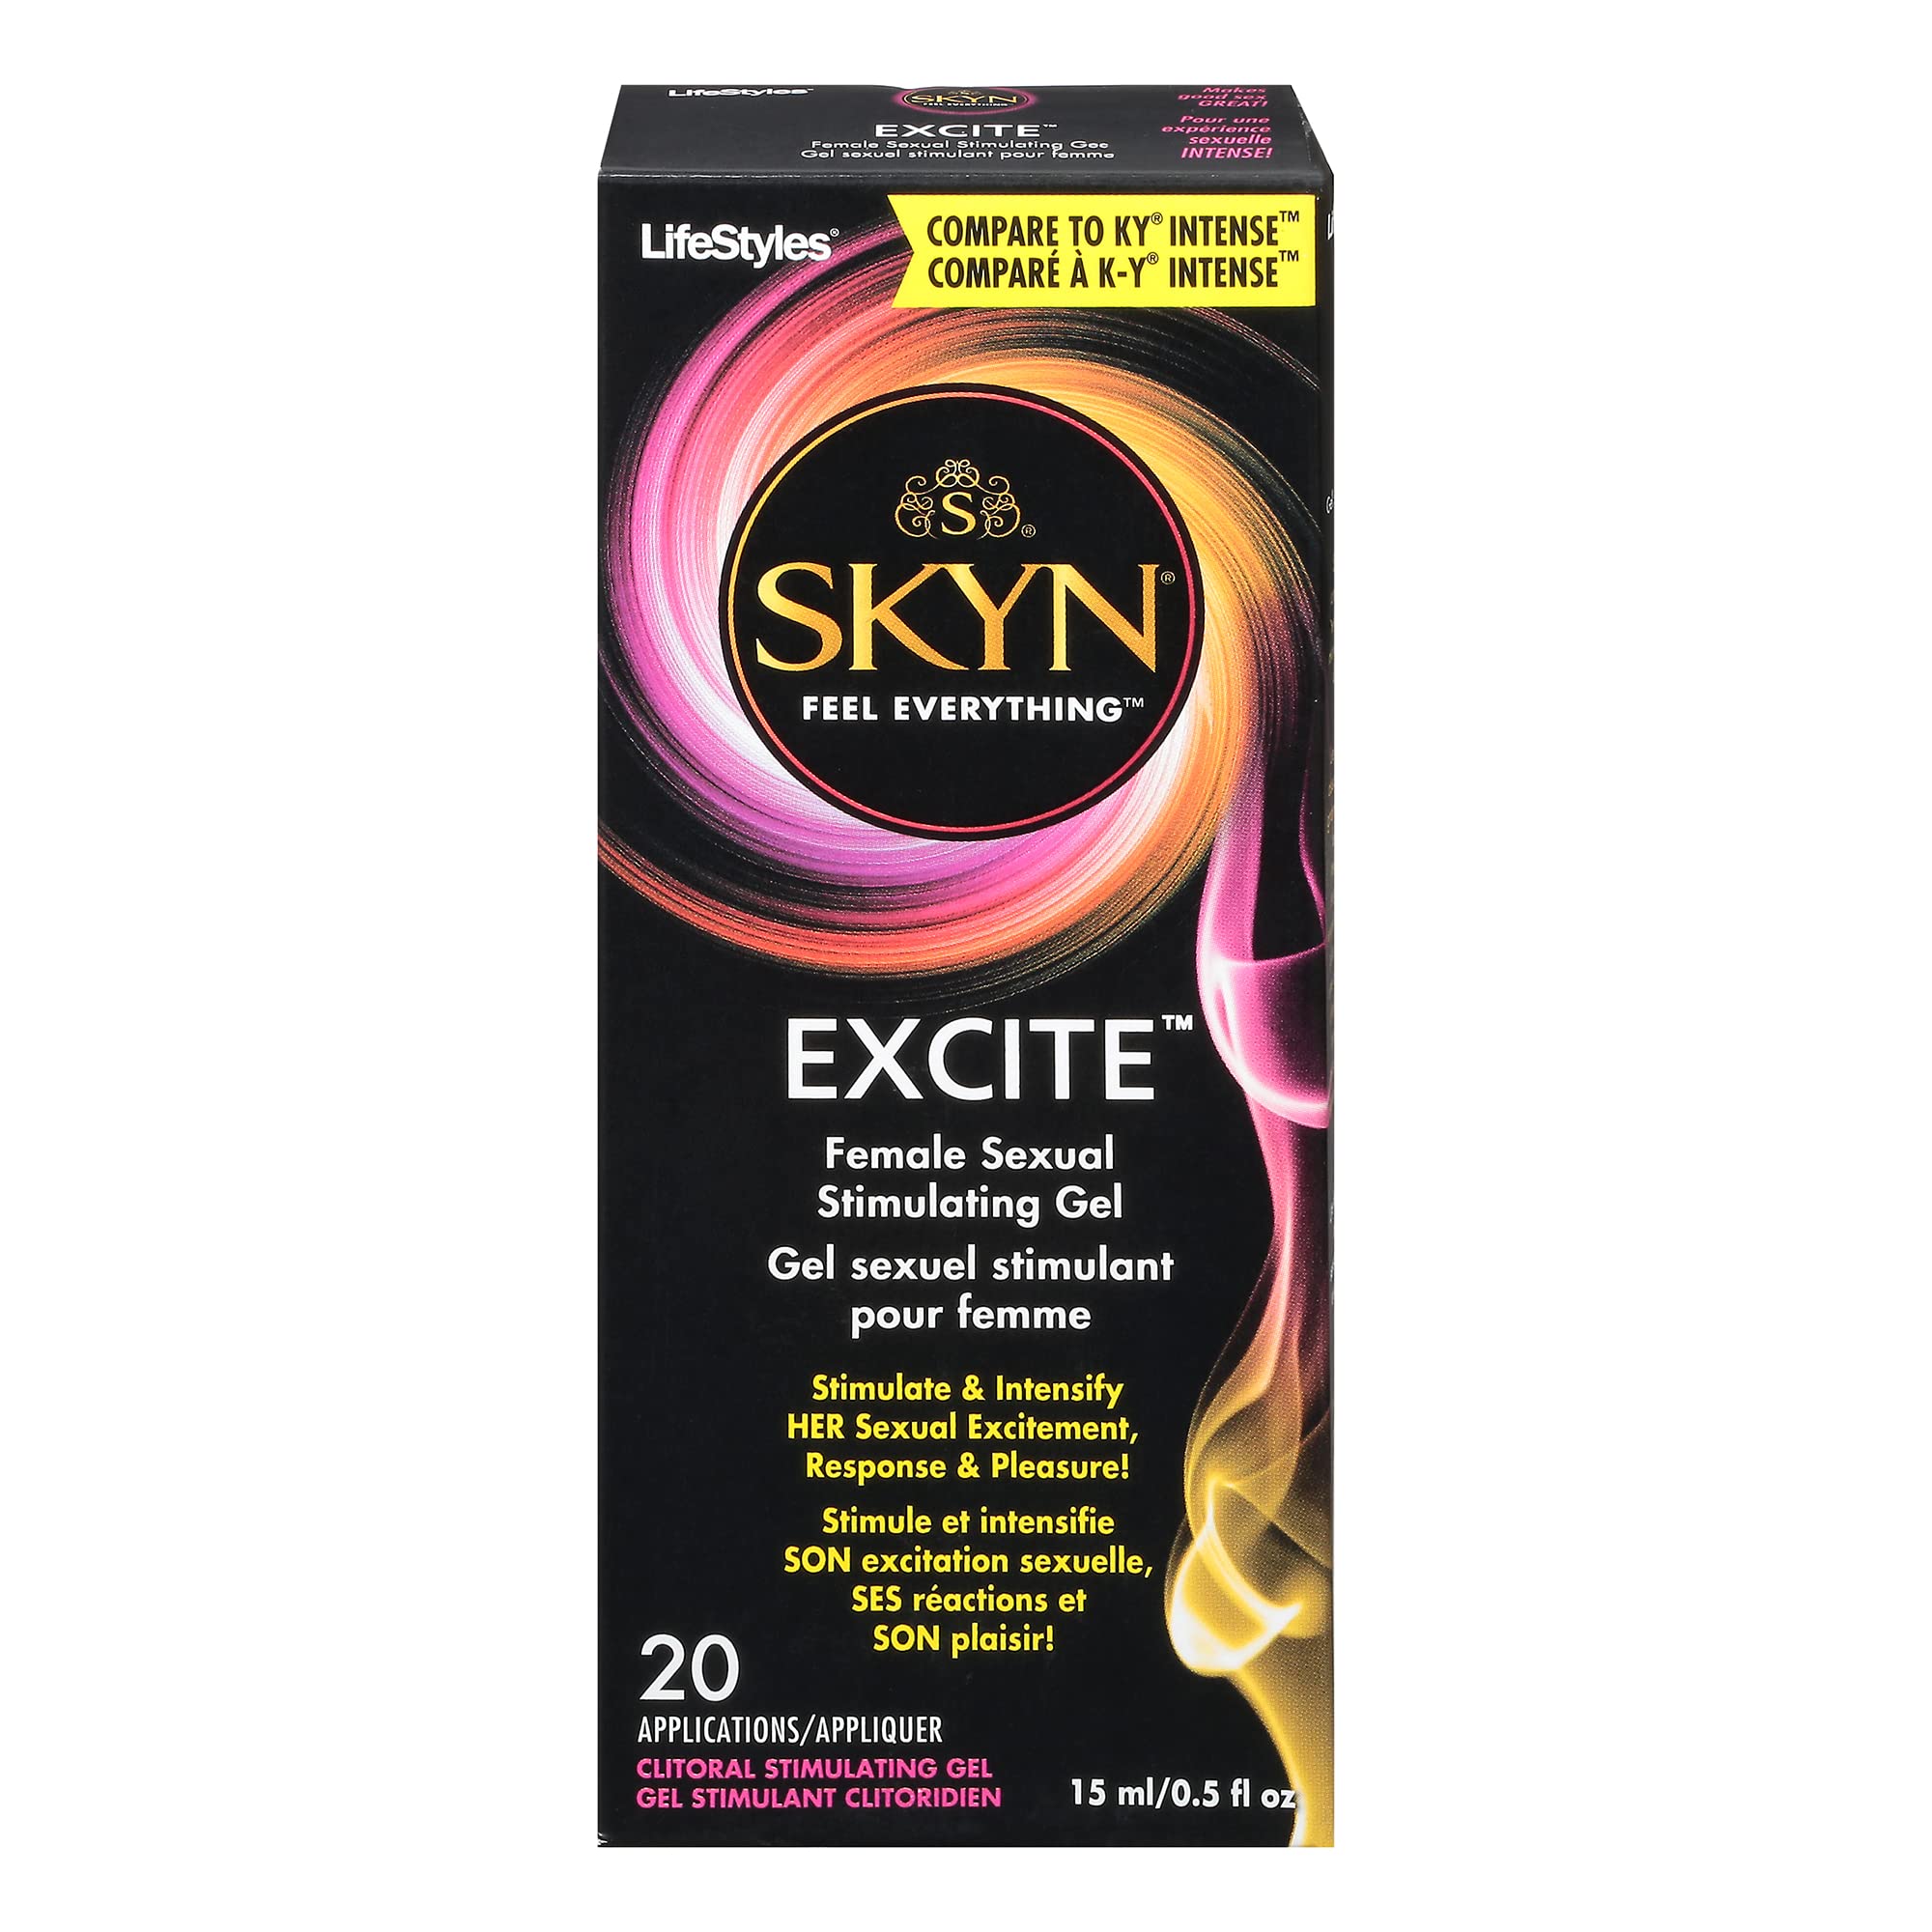 SKYN EXCITE Female Sexual Stimulating Gel, 0.5 Ounce